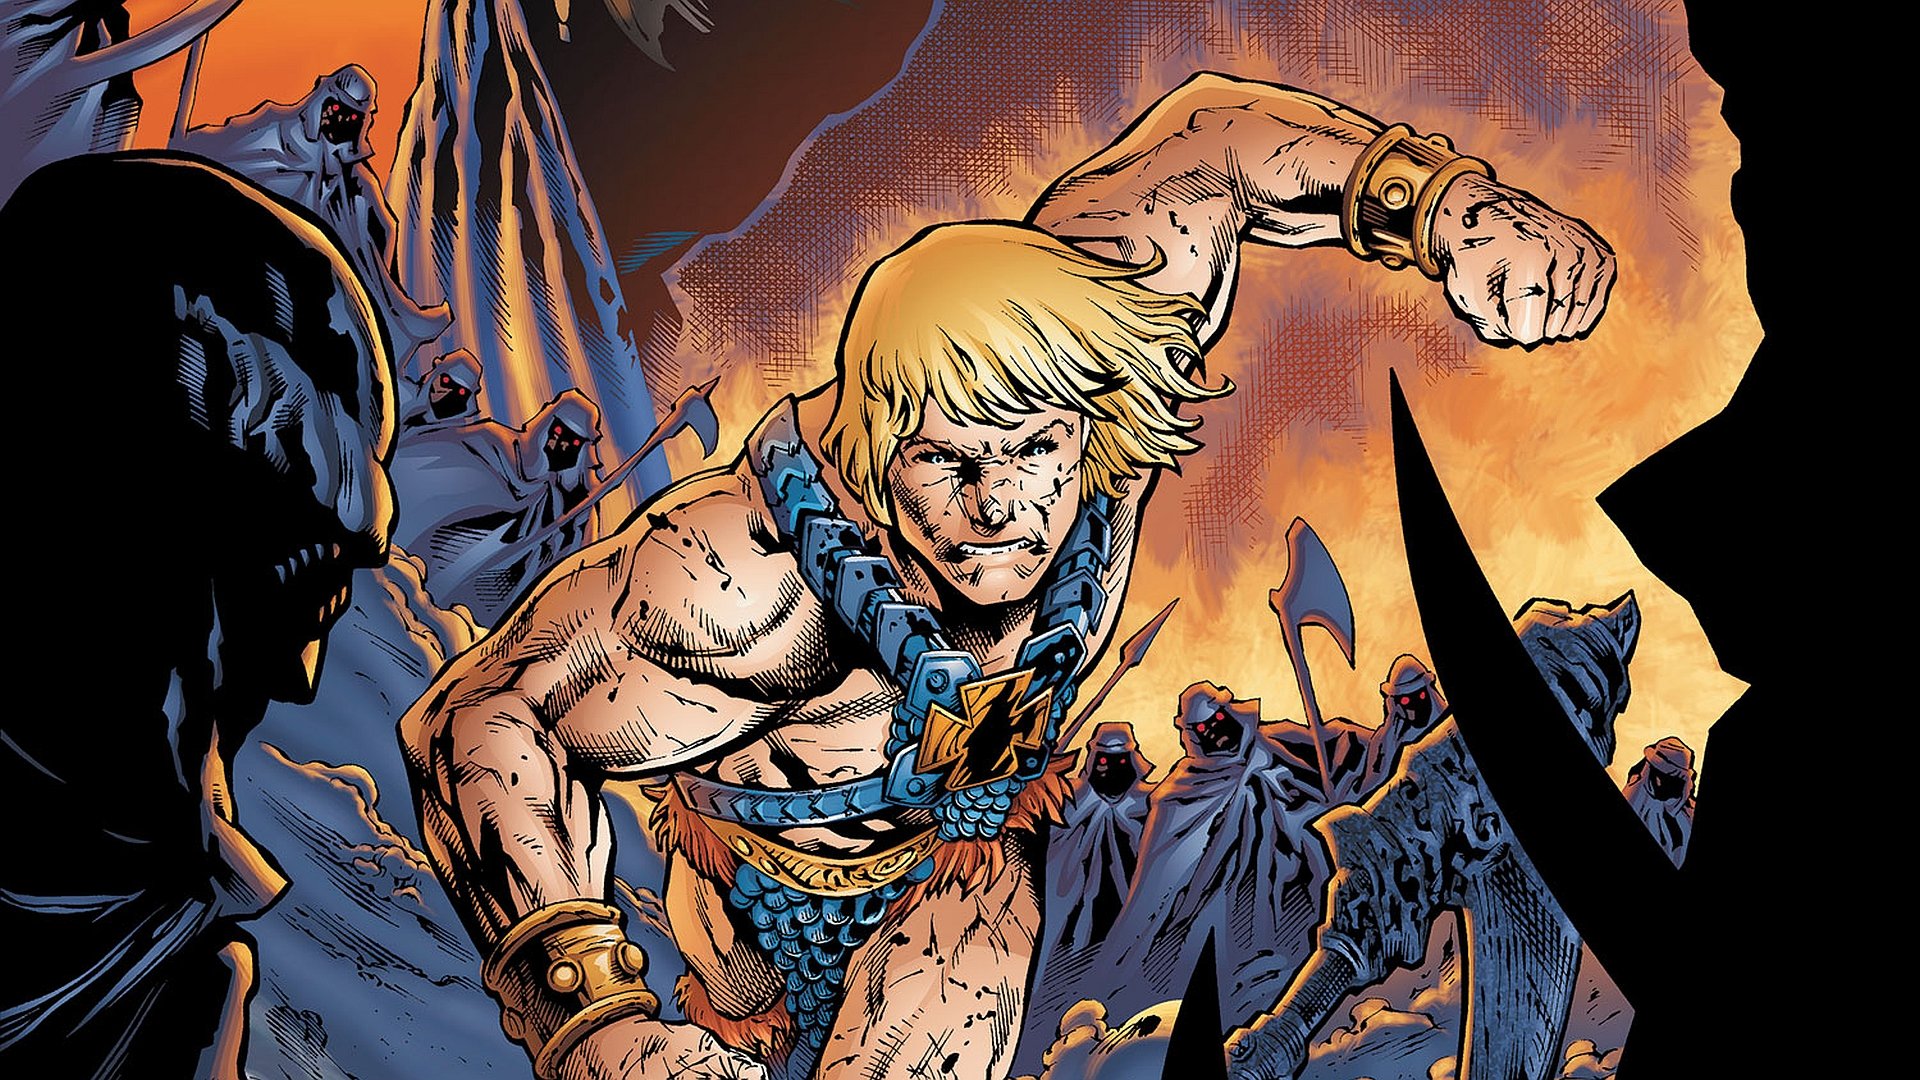 Free Download He-man And The Masters Of The Universe - He Man And The Masters Of The Universe 2012 Dc Comic , HD Wallpaper & Backgrounds